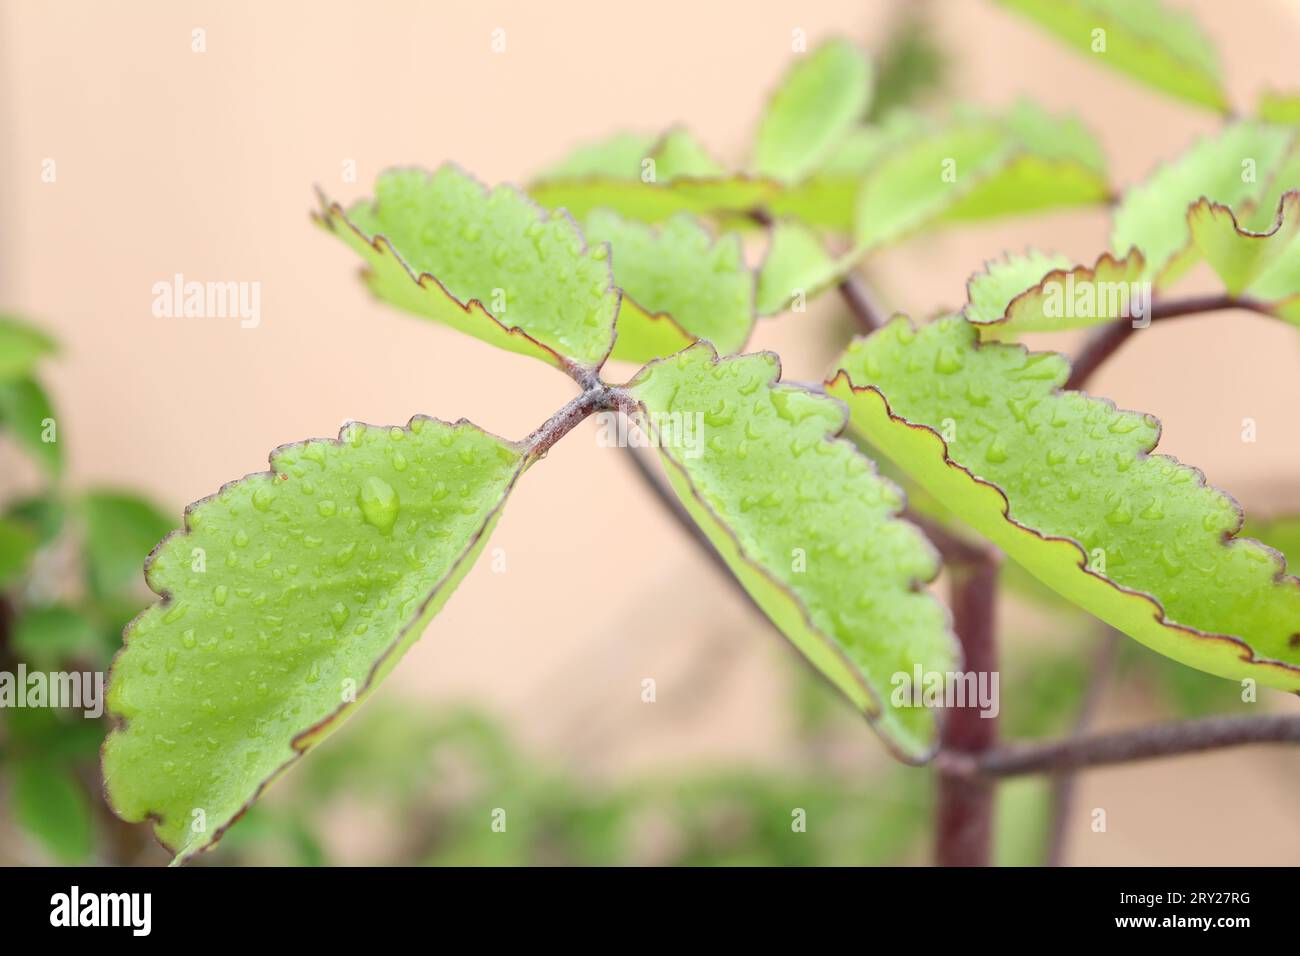 The green leaves in the rainy day Stock Photo